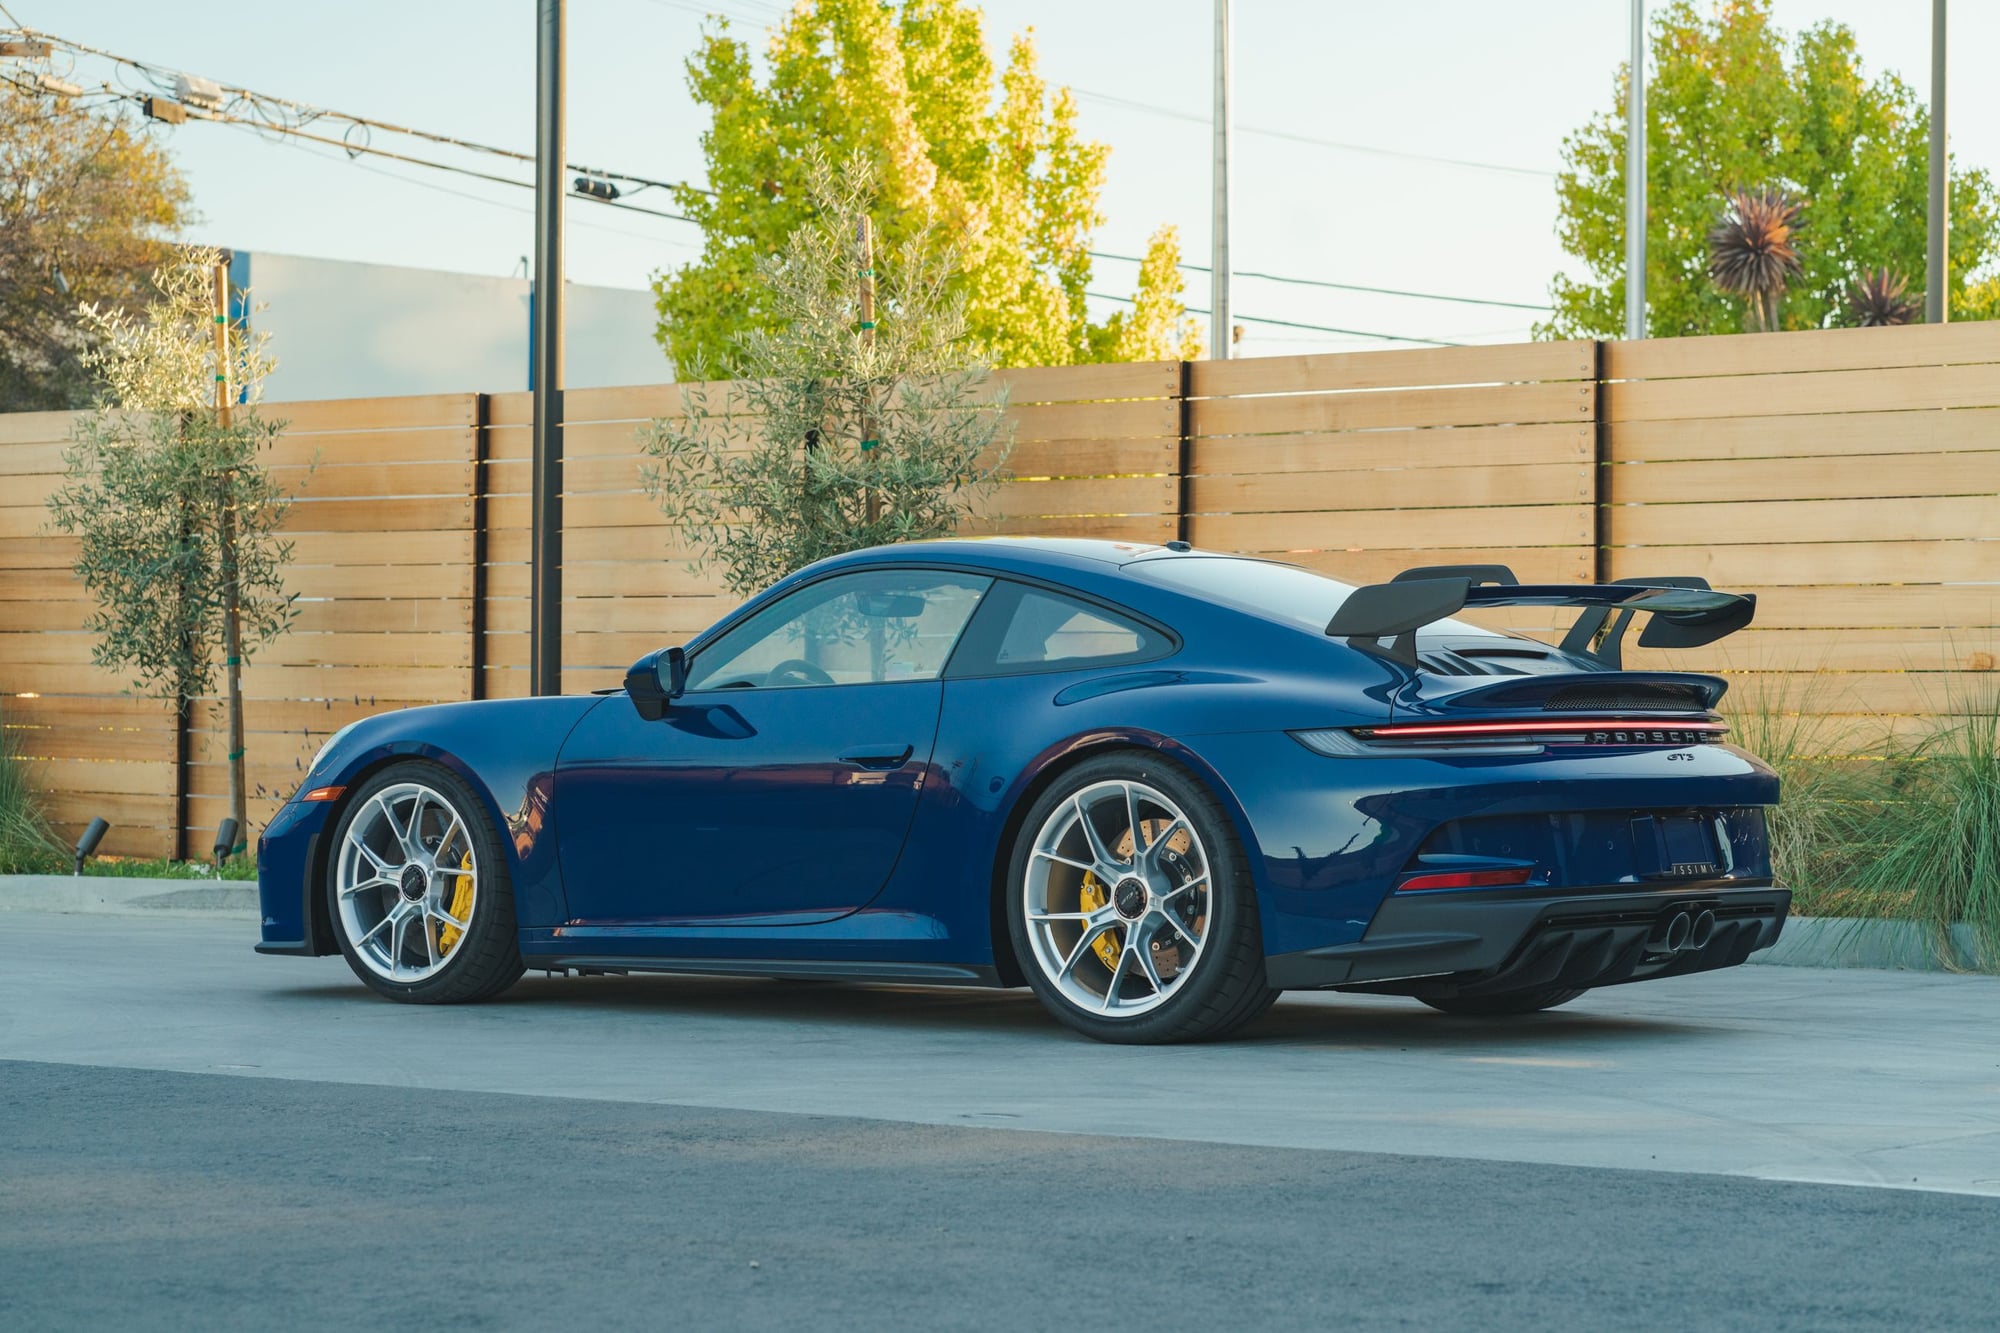 2022 Porsche 911 - 2022 992 GT3 in PTS Albert Blue With 6-Speed Manual and $46,800 in Options. - Used - VIN WP0AC2A94NS270753 - 46 Miles - 6 cyl - 2WD - Manual - Coupe - Blue - Redwood City, CA 94063, United States